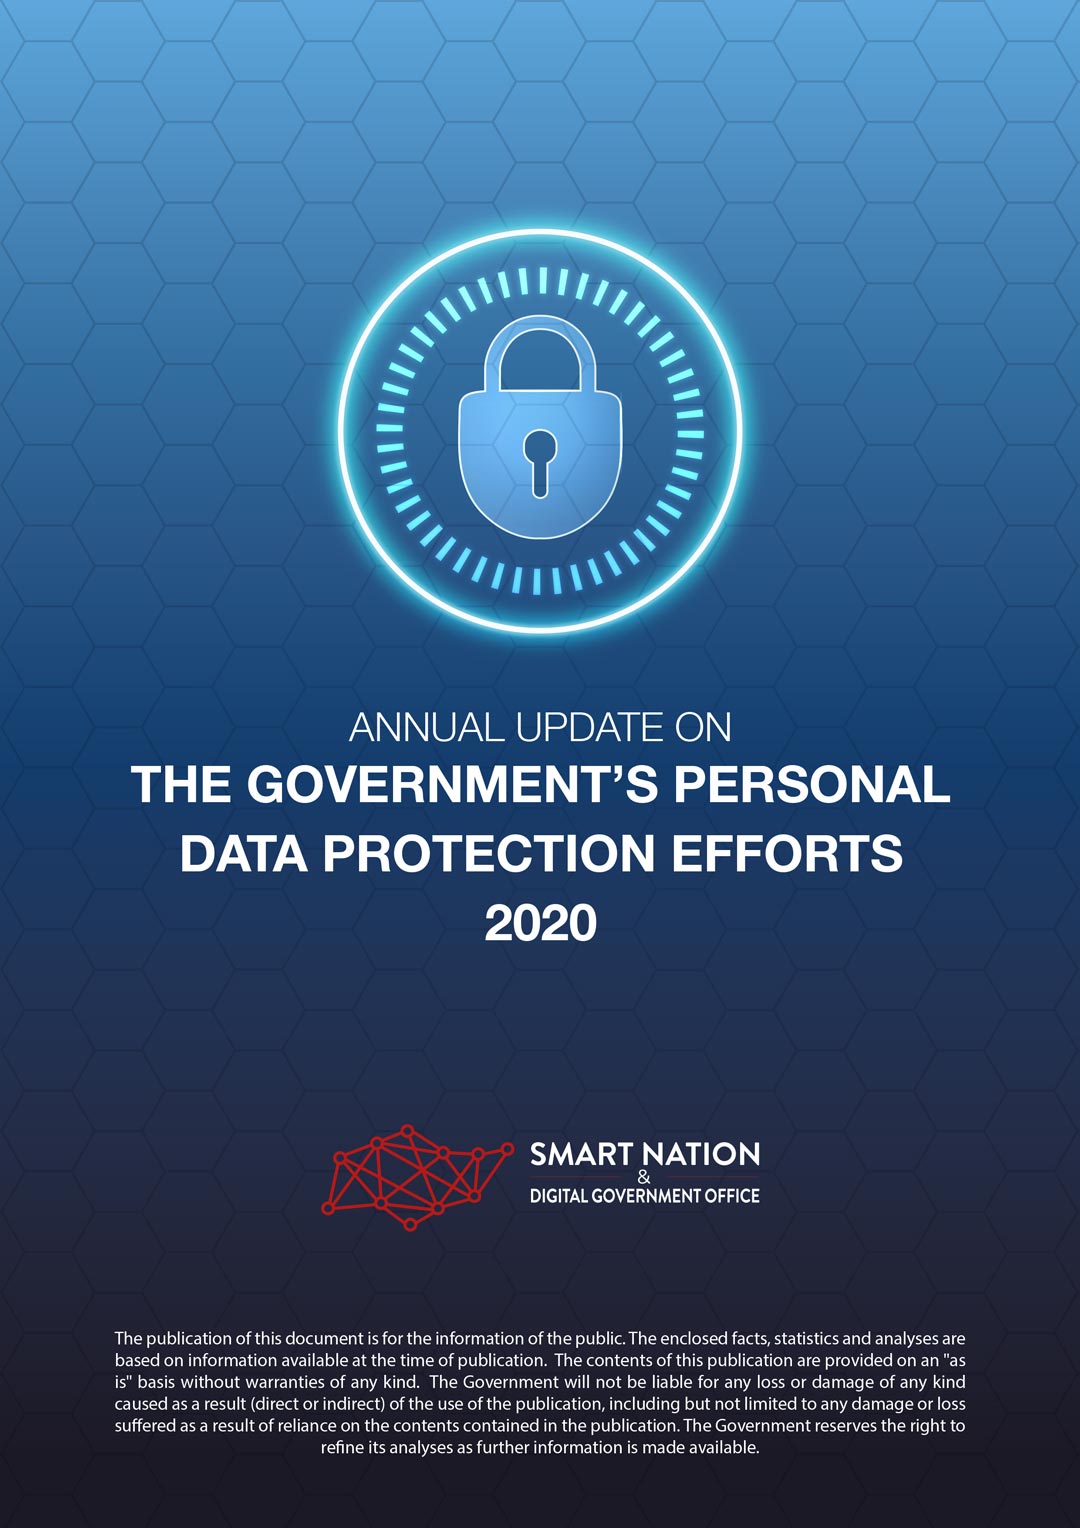 2020: First Update on the Government's Personal Data Protection Efforts